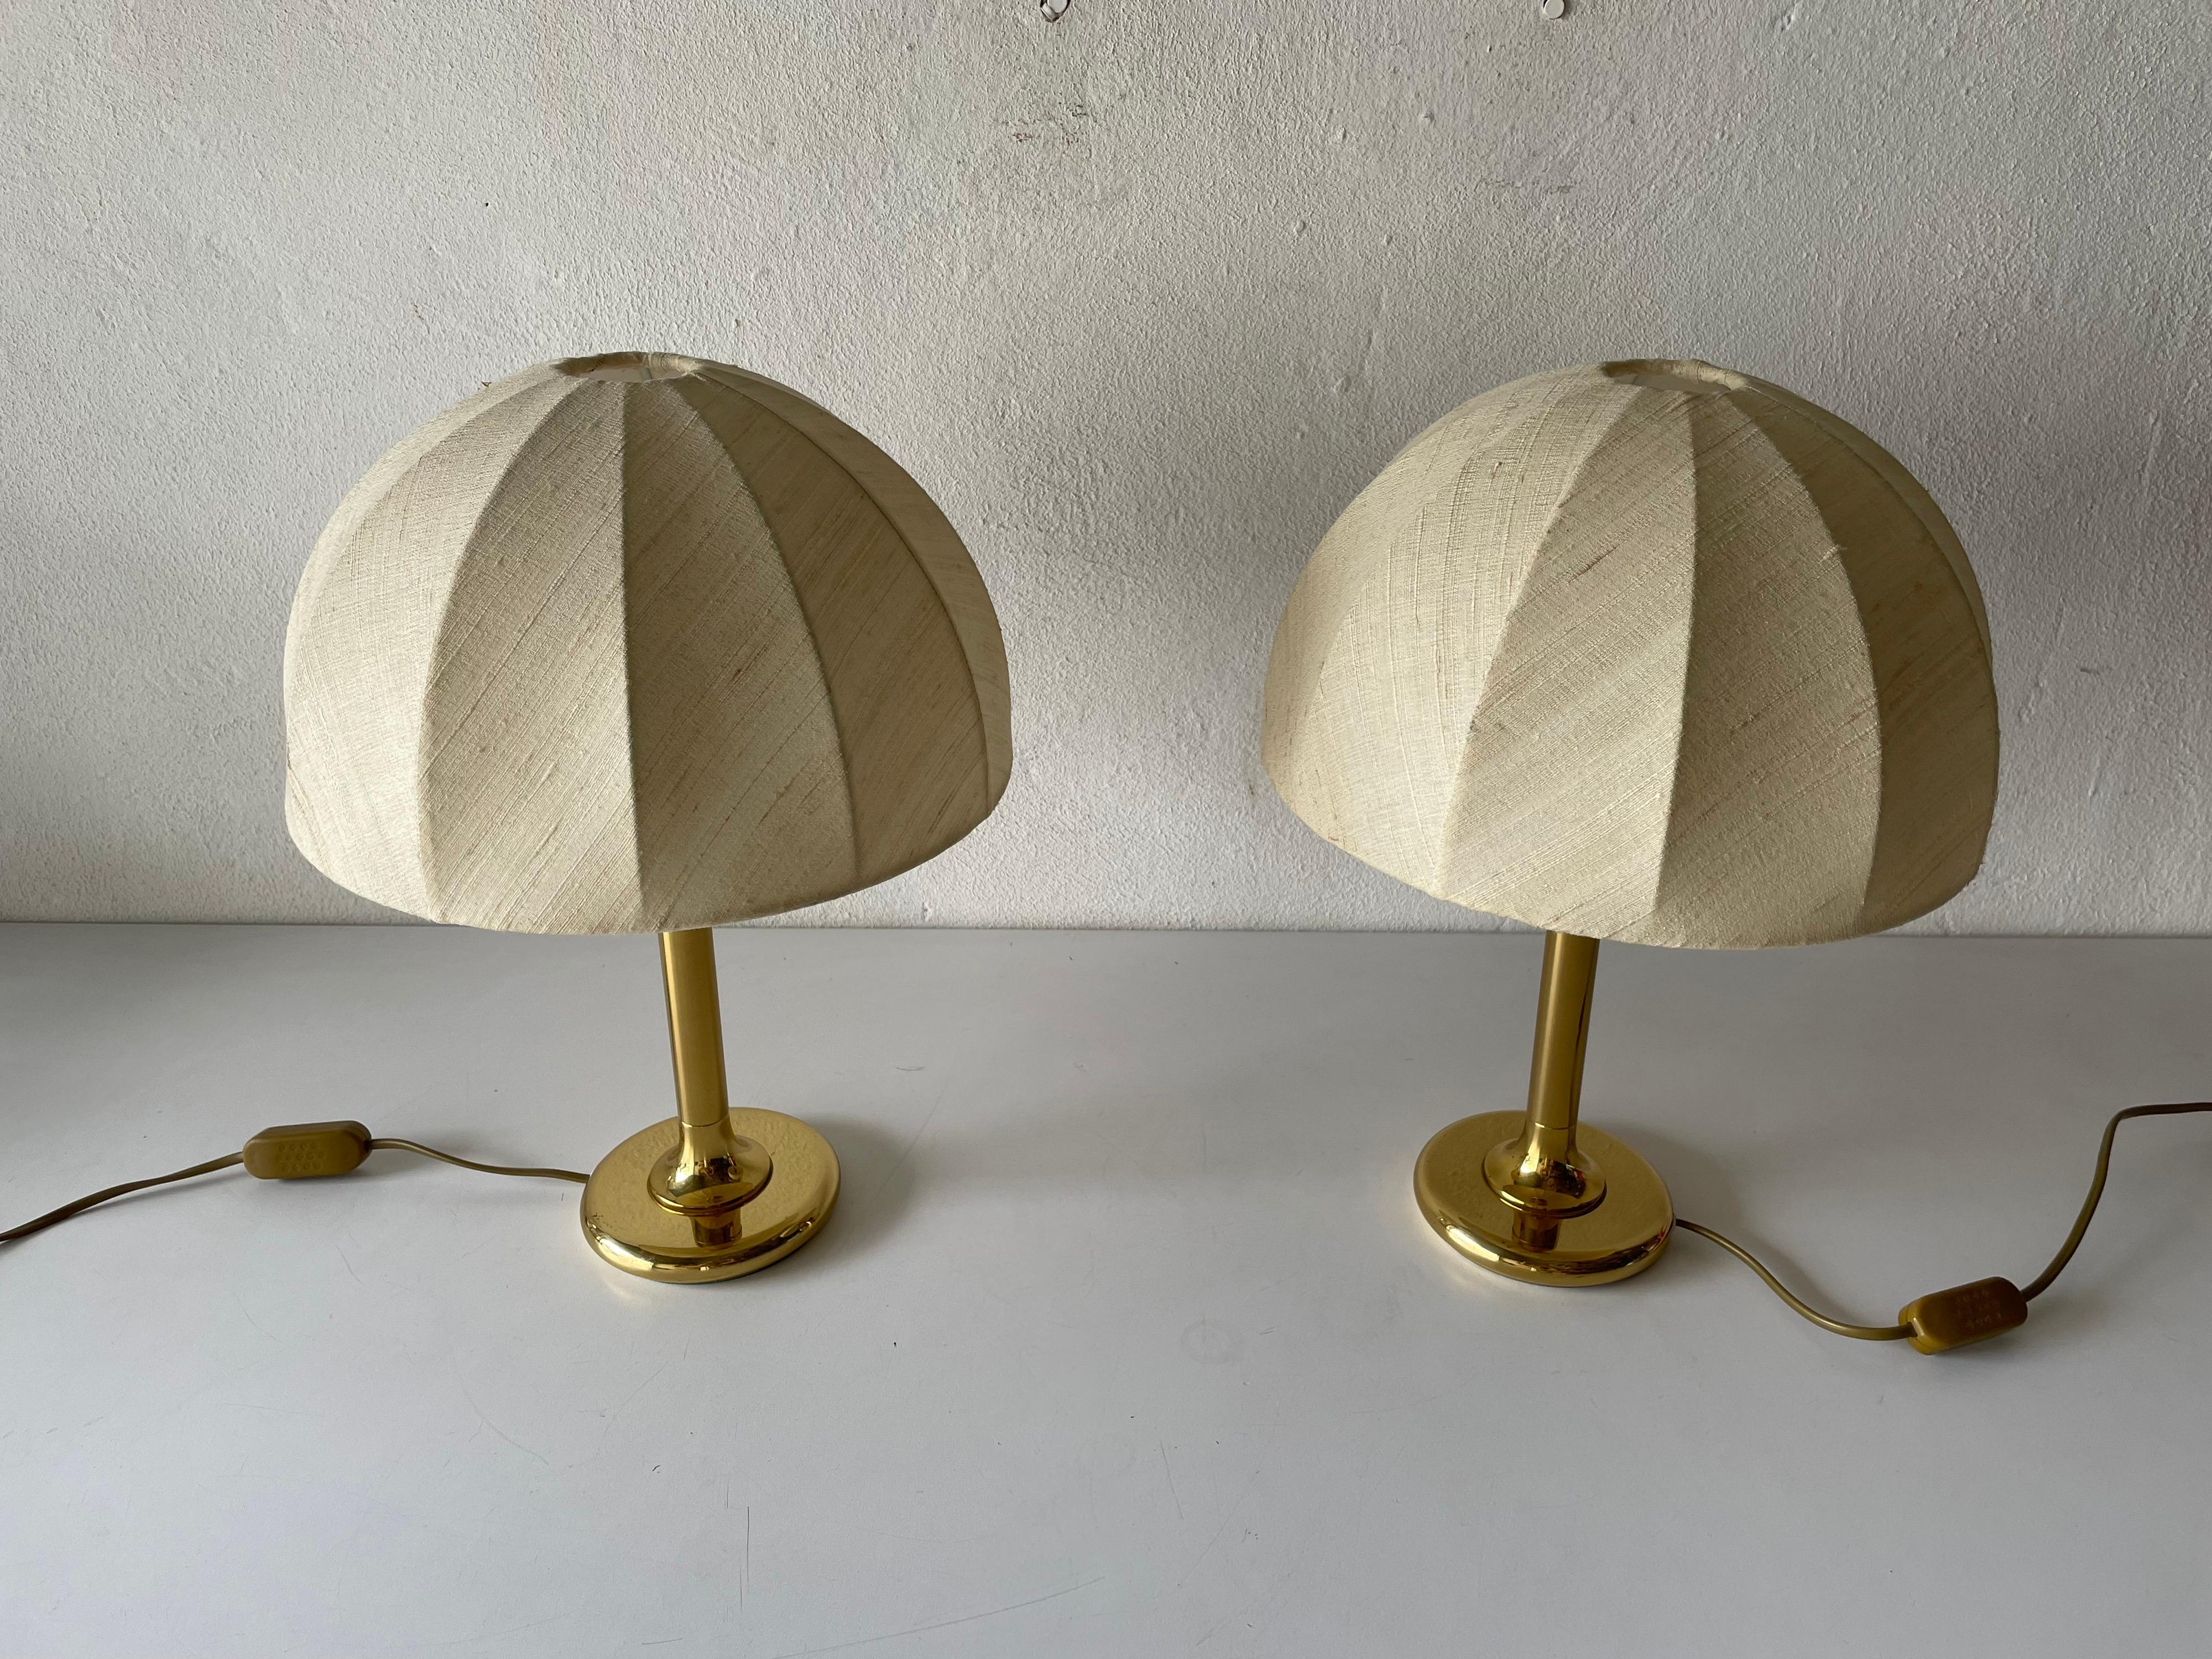 Fabric shade & brass body elegant pair of bedside lamps by ERU, 1980s, Germany

Minimal and natural design with fabric
Very high quality.
Fully functional.


Original cables and plugs. These lamps are suitable for EU plug socket. Switch